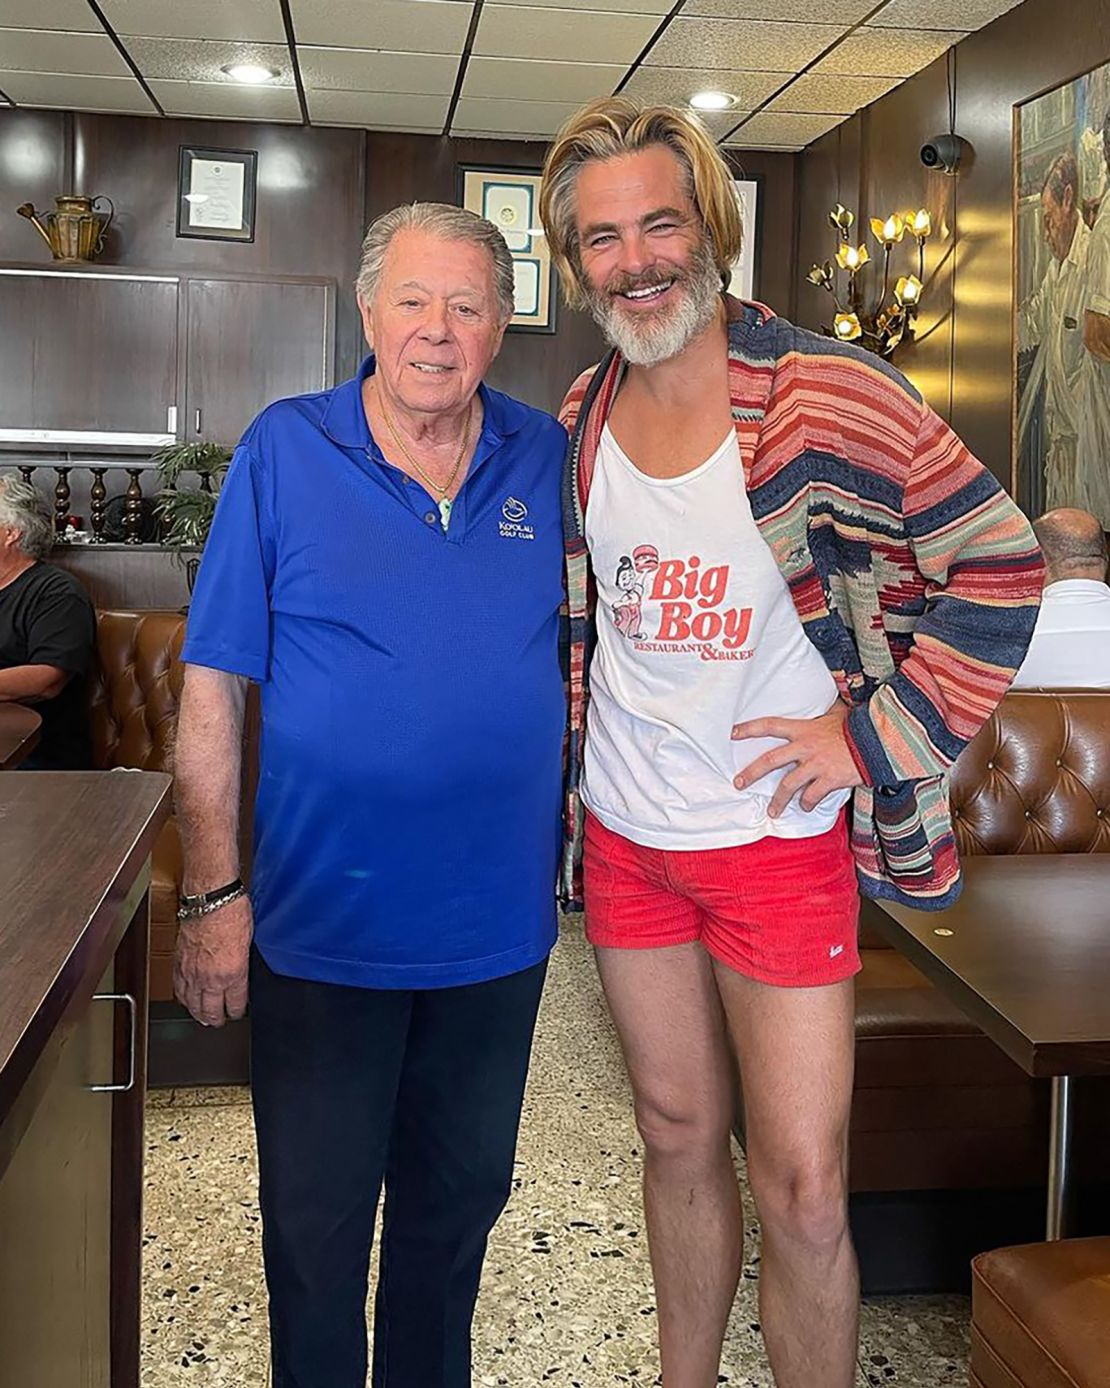 In a vintage "Big Boy" tee and short shorts combo, Pine is pictured here at Langer's Deli in Los Angeles, in a photo the deli <a href="https://www.instagram.com/p/C54K2mwvCyX/" target="_blank">shared on Instagram</a> on April 17.